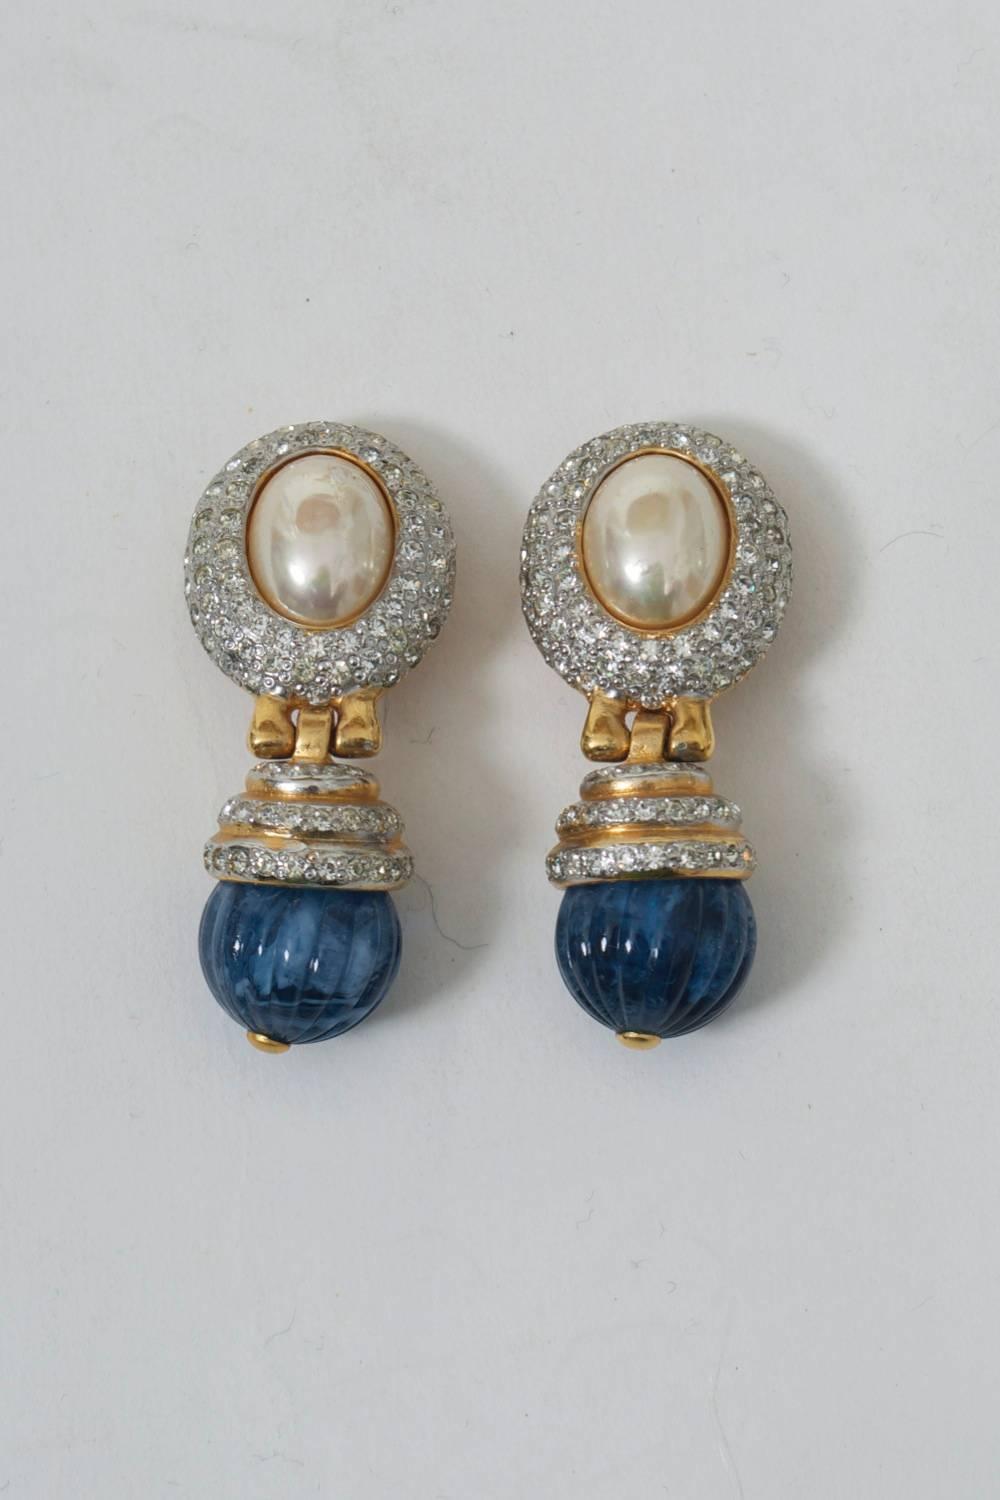 1980s Mixed Stone Drop Earrings In Excellent Condition For Sale In Alford, MA